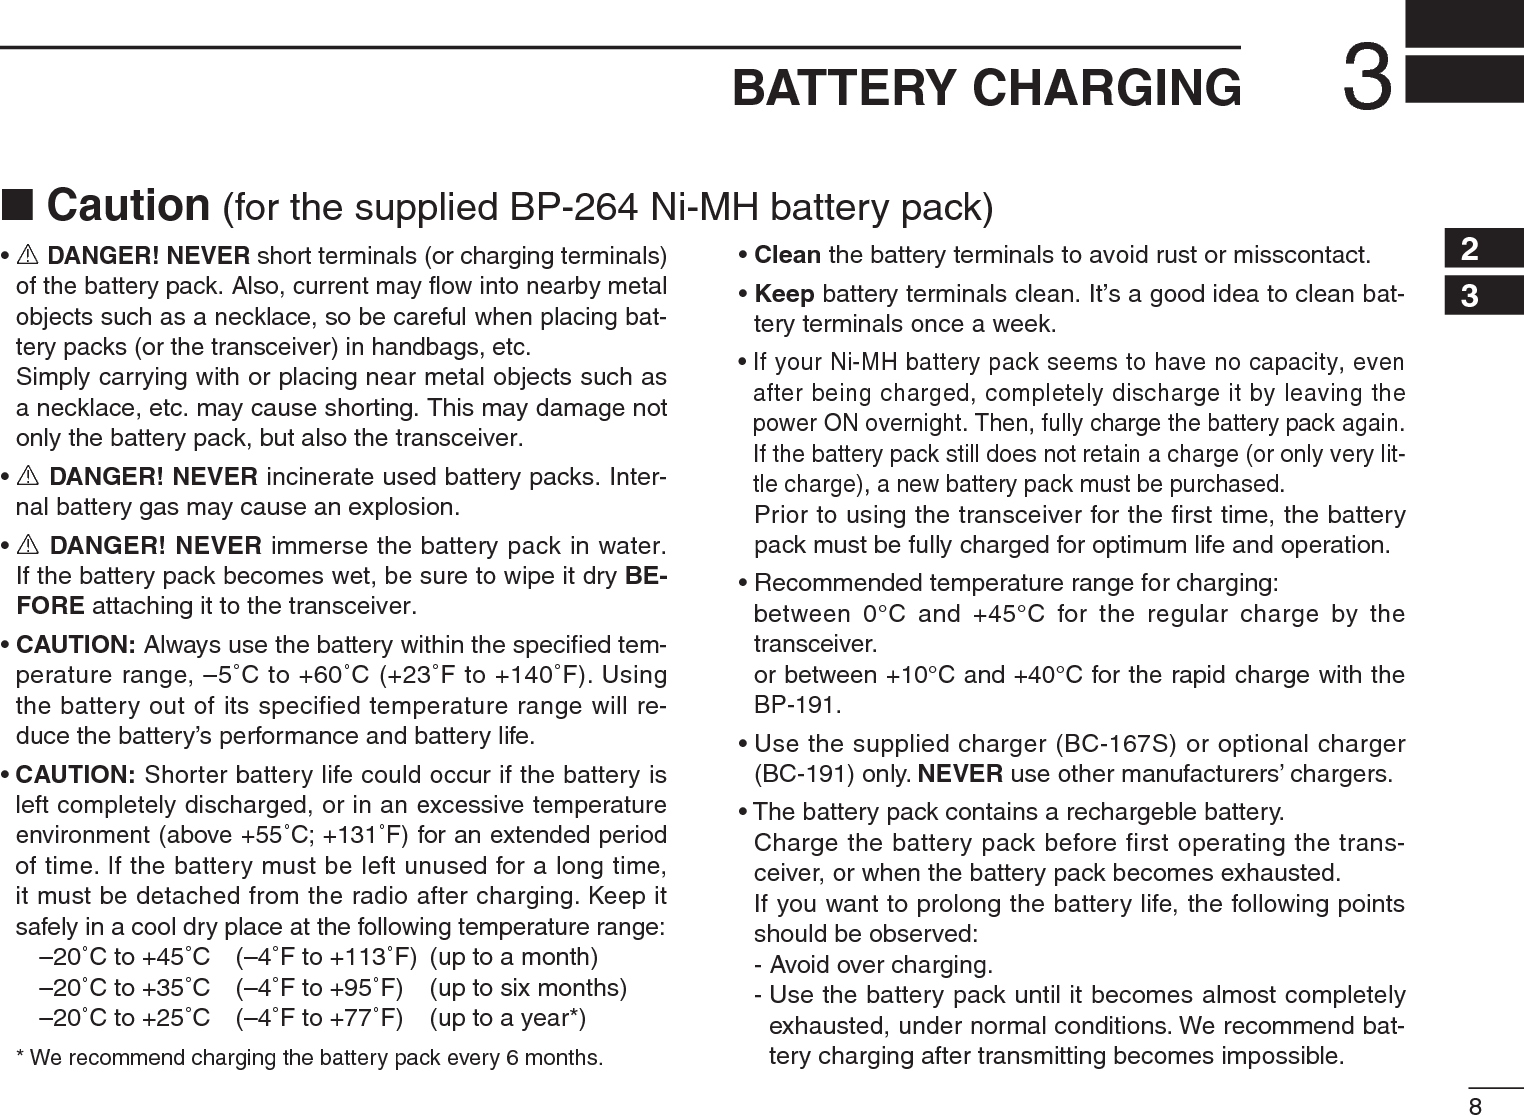 83BATTERY CHARGING12345678910111213141516171819•R DANGER! NEVER short terminals (or charging terminals) of the battery pack. Also, current may ﬂow into nearby metal objects such as a necklace, so be careful when placing bat-tery packs (or the transceiver) in handbags, etc.Simply carrying with or placing near metal objects such as a necklace, etc. may cause shorting. This may damage not only the battery pack, but also the transceiver.•R DANGER! NEVER incinerate used battery packs. Inter-nal battery gas may cause an explosion.•R DANGER! NEVER immerse the battery pack in water. If the battery pack becomes wet, be sure to wipe it dry BE-FORE attaching it to the transceiver.•CAUTION: Always use the battery within the speciﬁed tem-perature range, –5˚C to +60˚C (+23˚F to +140˚F). Using the battery out of its specified temperature range will re-duce the battery’s performance and battery life.•CAUTION: Shorter battery life could occur if the battery is left completely discharged, or in an excessive temperature environment (above +55˚C; +131˚F) for an extended period of time. If the battery must be left unused for a long time, it must be detached from the radio after charging. Keep it safely in a cool dry place at the following temperature range:–20˚C to +45˚C (–4˚F to +113˚F) (up to a month)–20˚C to +35˚C (–4˚F to +95˚F) (up to six months)–20˚C to +25˚C (–4˚F to +77˚F) (up to a year*)* We recommend charging the battery pack every 6 months.•Clean the battery terminals to avoid rust or misscontact.•Keep battery terminals clean. It’s a good idea to clean bat-tery terminals once a week.• If your Ni-MH battery pack seems to have no capacity, even after being charged, completely discharge it by leaving the power ON overnight. Then, fully charge the battery pack again. If the battery pack still does not retain a charge (or only very lit-tle charge), a new battery pack must be purchased.Prior to using the transceiver for the ﬁrst time, the battery pack must be fully charged for optimum life and operation.• Recommended temperature range for charging:between 0°C and +45°C for the regular charge by the transceiver.or between +10°C and +40°C for the rapid charge with the BP-191.• Use the supplied charger (BC-167S) or optional charger (BC-191) only. NEVER use other manufacturers’ chargers.• The battery pack contains a rechargeble battery.Charge the battery pack before first operating the trans-ceiver, or when the battery pack becomes exhausted.If you want to prolong the battery life, the following points should be observed:- Avoid over charging.- Use the battery pack until it becomes almost completely exhausted, under normal conditions. We recommend bat-tery charging after transmitting becomes impossible.N Caution (for the supplied BP-264 Ni-MH battery pack)